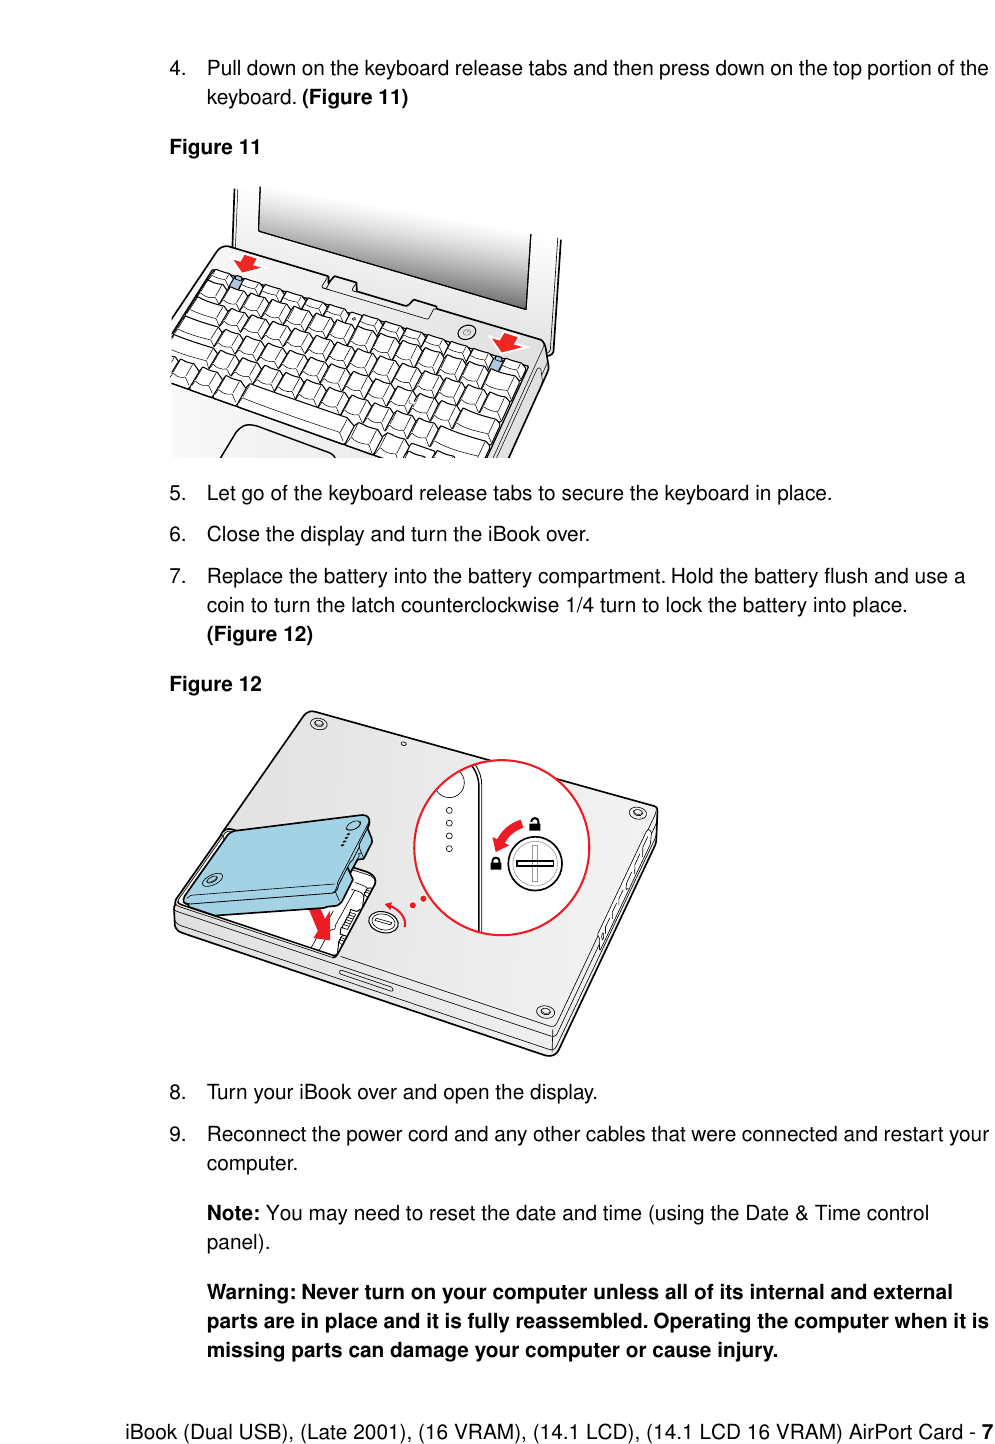  iBook (Dual USB), (Late 2001), (16 VRAM), (14.1 LCD), (14.1 LCD 16 VRAM) AirPort Card -  7 4. Pull down on the keyboard release tabs and then press down on the top portion of the keyboard.  (Figure 11)Figure 11 5. Let go of the keyboard release tabs to secure the keyboard in place.6. Close the display and turn the iBook over.7. Replace the battery into the battery compartment. Hold the battery ﬂush and use a coin to turn the latch counterclockwise 1/4 turn to lock the battery into place.  (Figure 12)Figure 12 8. Turn your iBook over and open the display.9. Reconnect the power cord and any other cables that were connected and restart your computer. Note:  You may need to reset the date and time (using the Date &amp; Time control panel). Warning: Never turn on your computer unless all of its internal and external parts are in place and it is fully reassembled. Operating the computer when it is missing parts can damage your computer or cause injury.